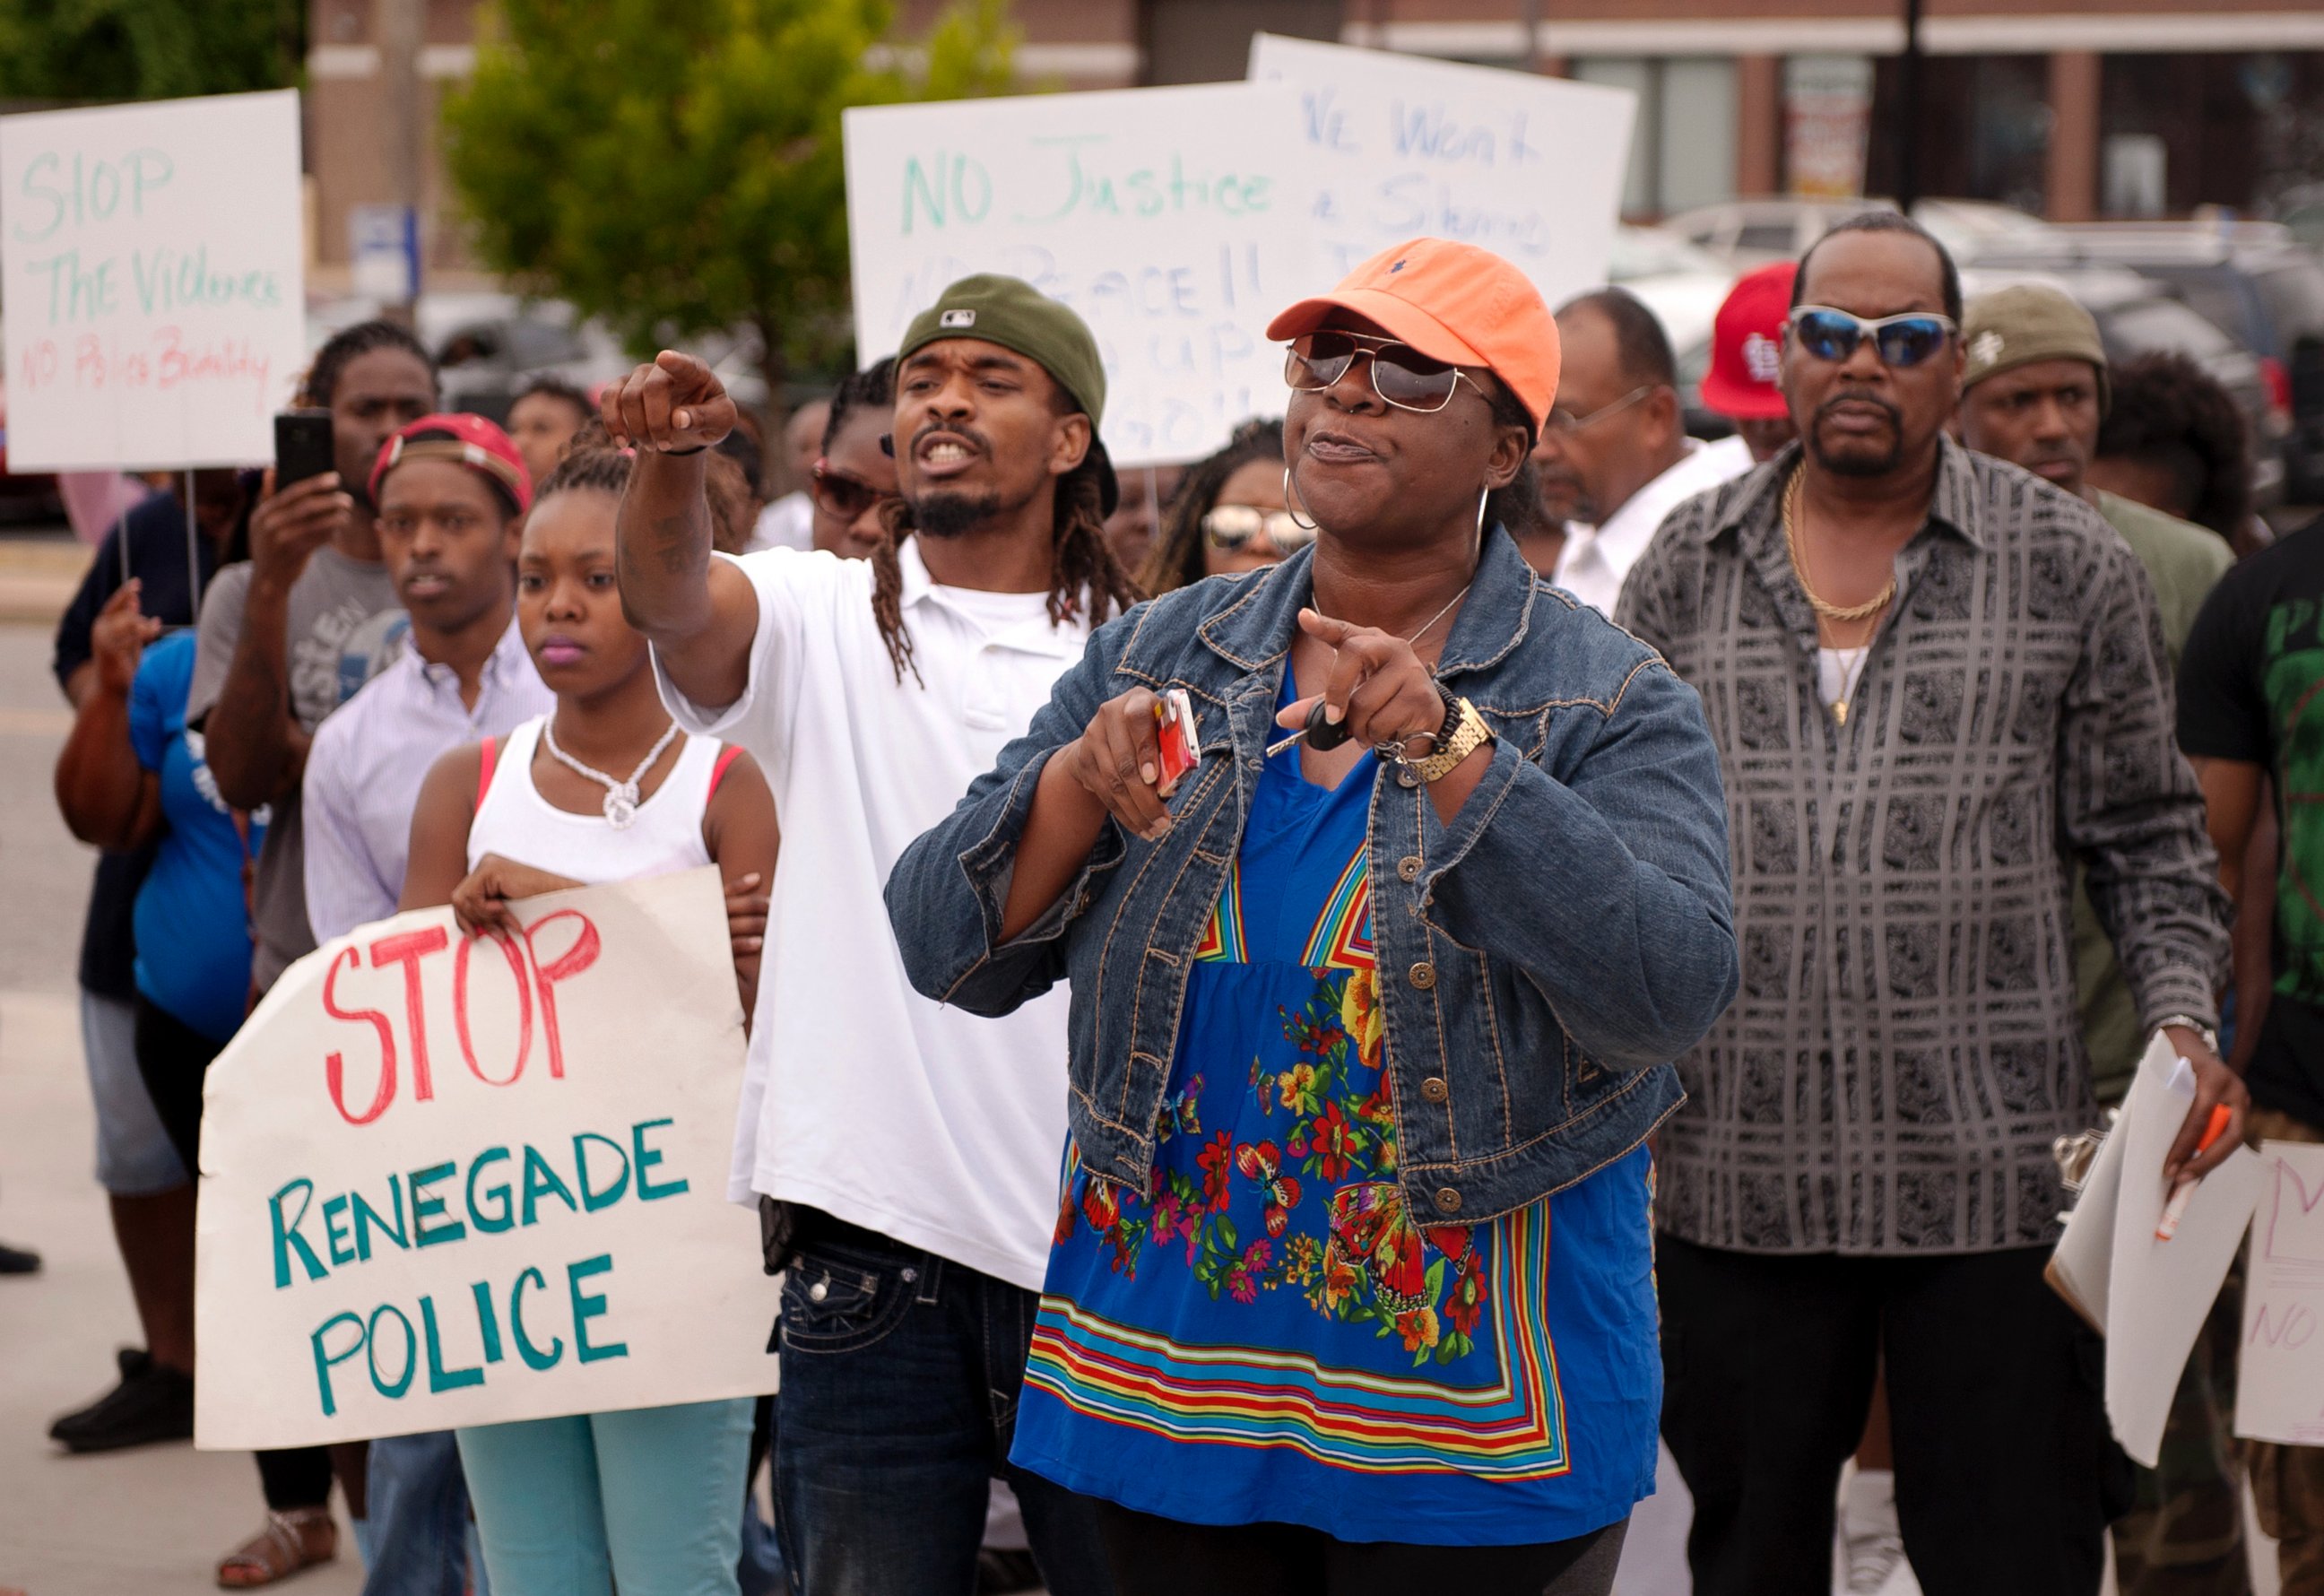 PHOTO: Protestors confront police during an impromptu rally, Aug. 10, 2014 to protest the shooting of Michael Brown, 18, by police in Ferguson, Mo.